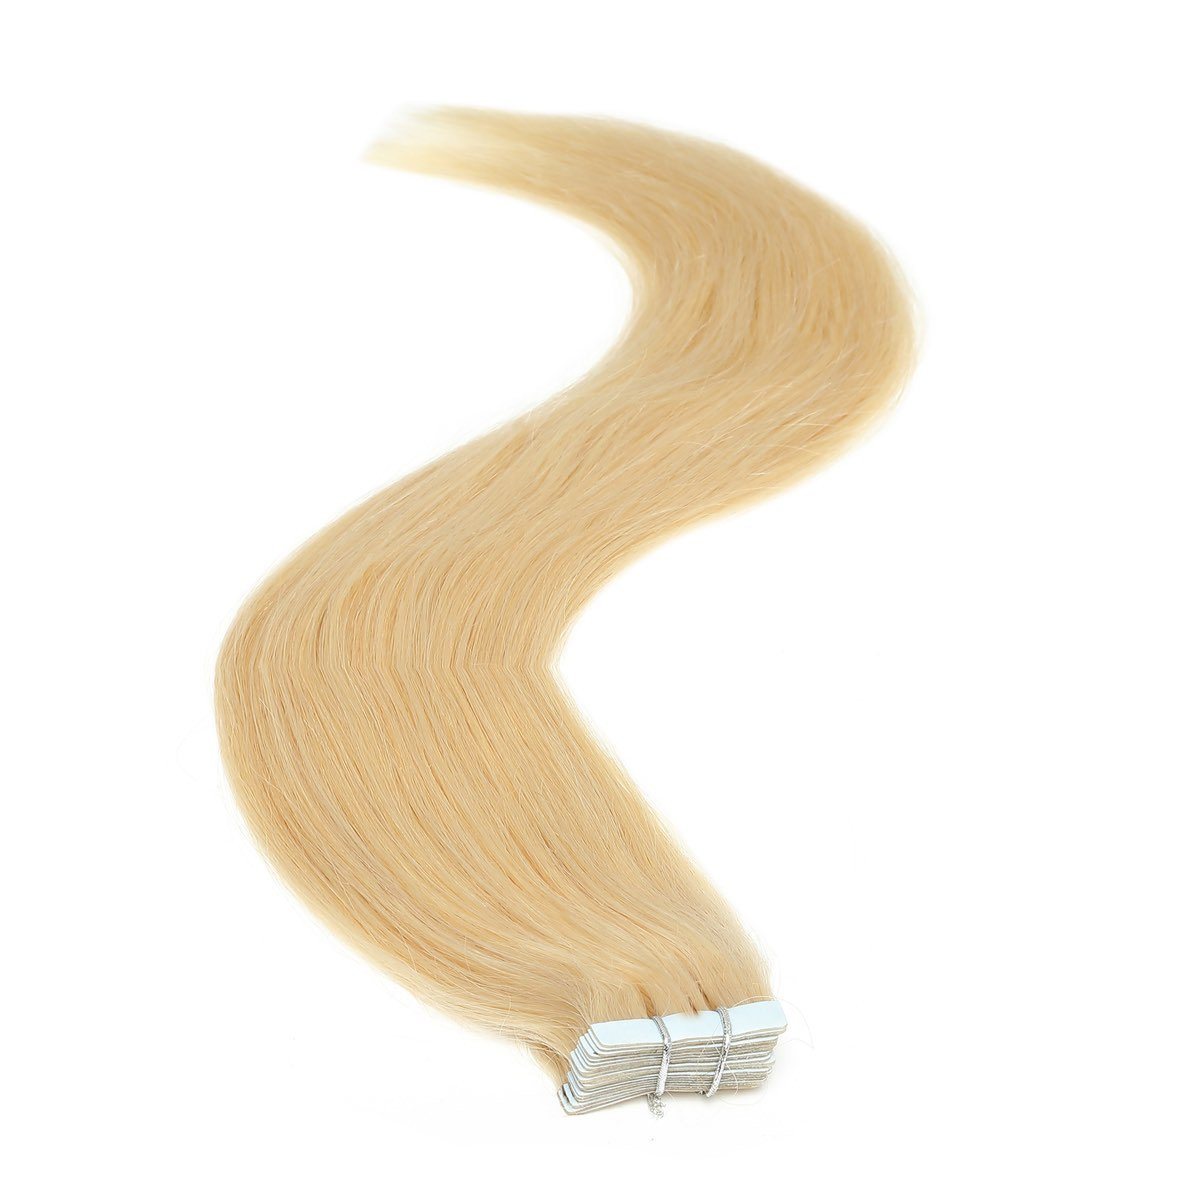 Tape in Hair Extensions | 18 inch | 20ps | 50g | Blondie Blonde (22) - Beauty Hair Products LtdHair Extensions